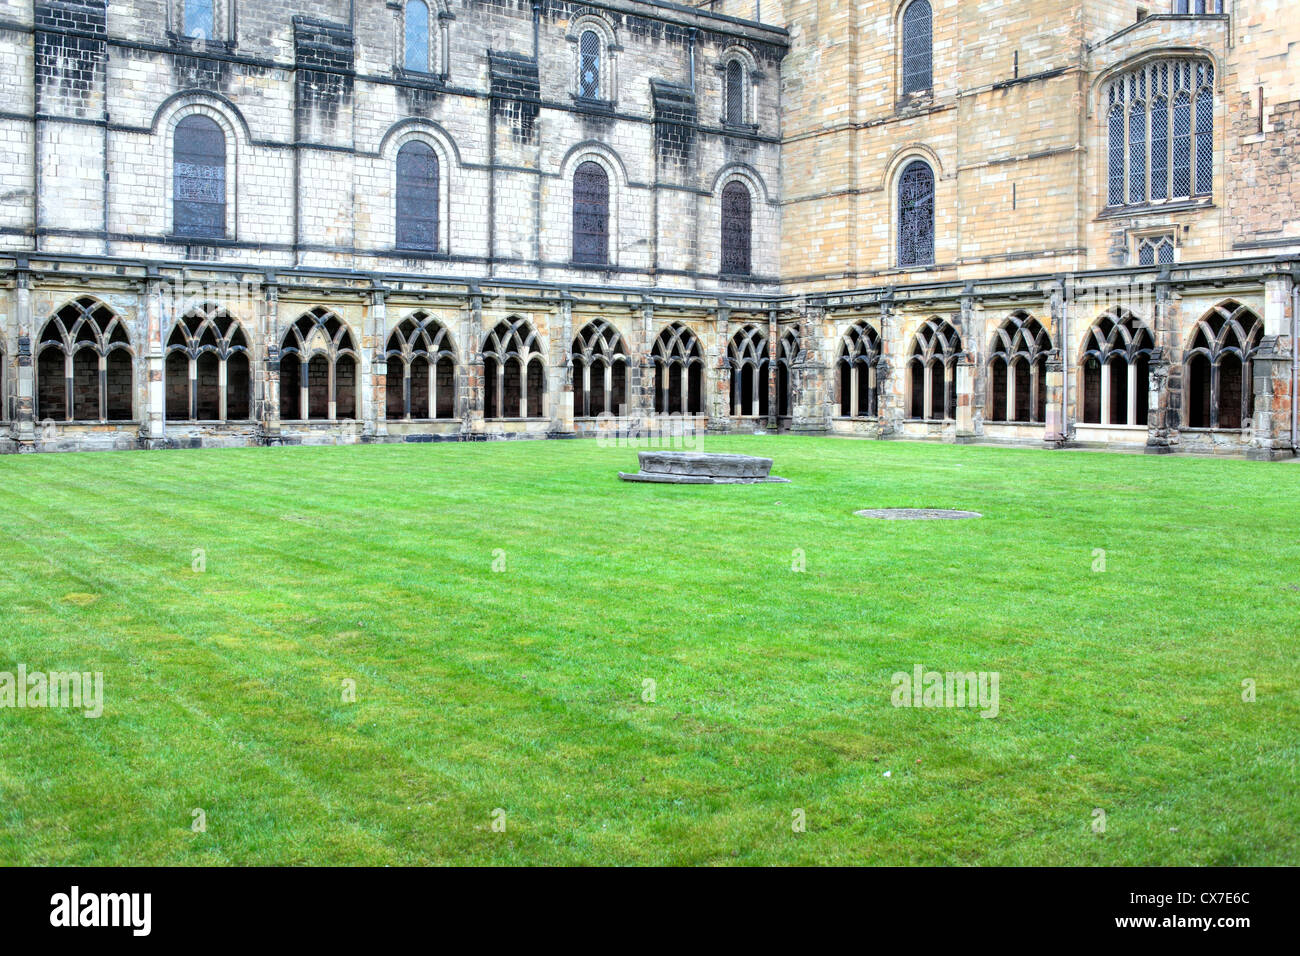 Cloister of Durham Cathedral, Durham, North East England, UK Stock Photo